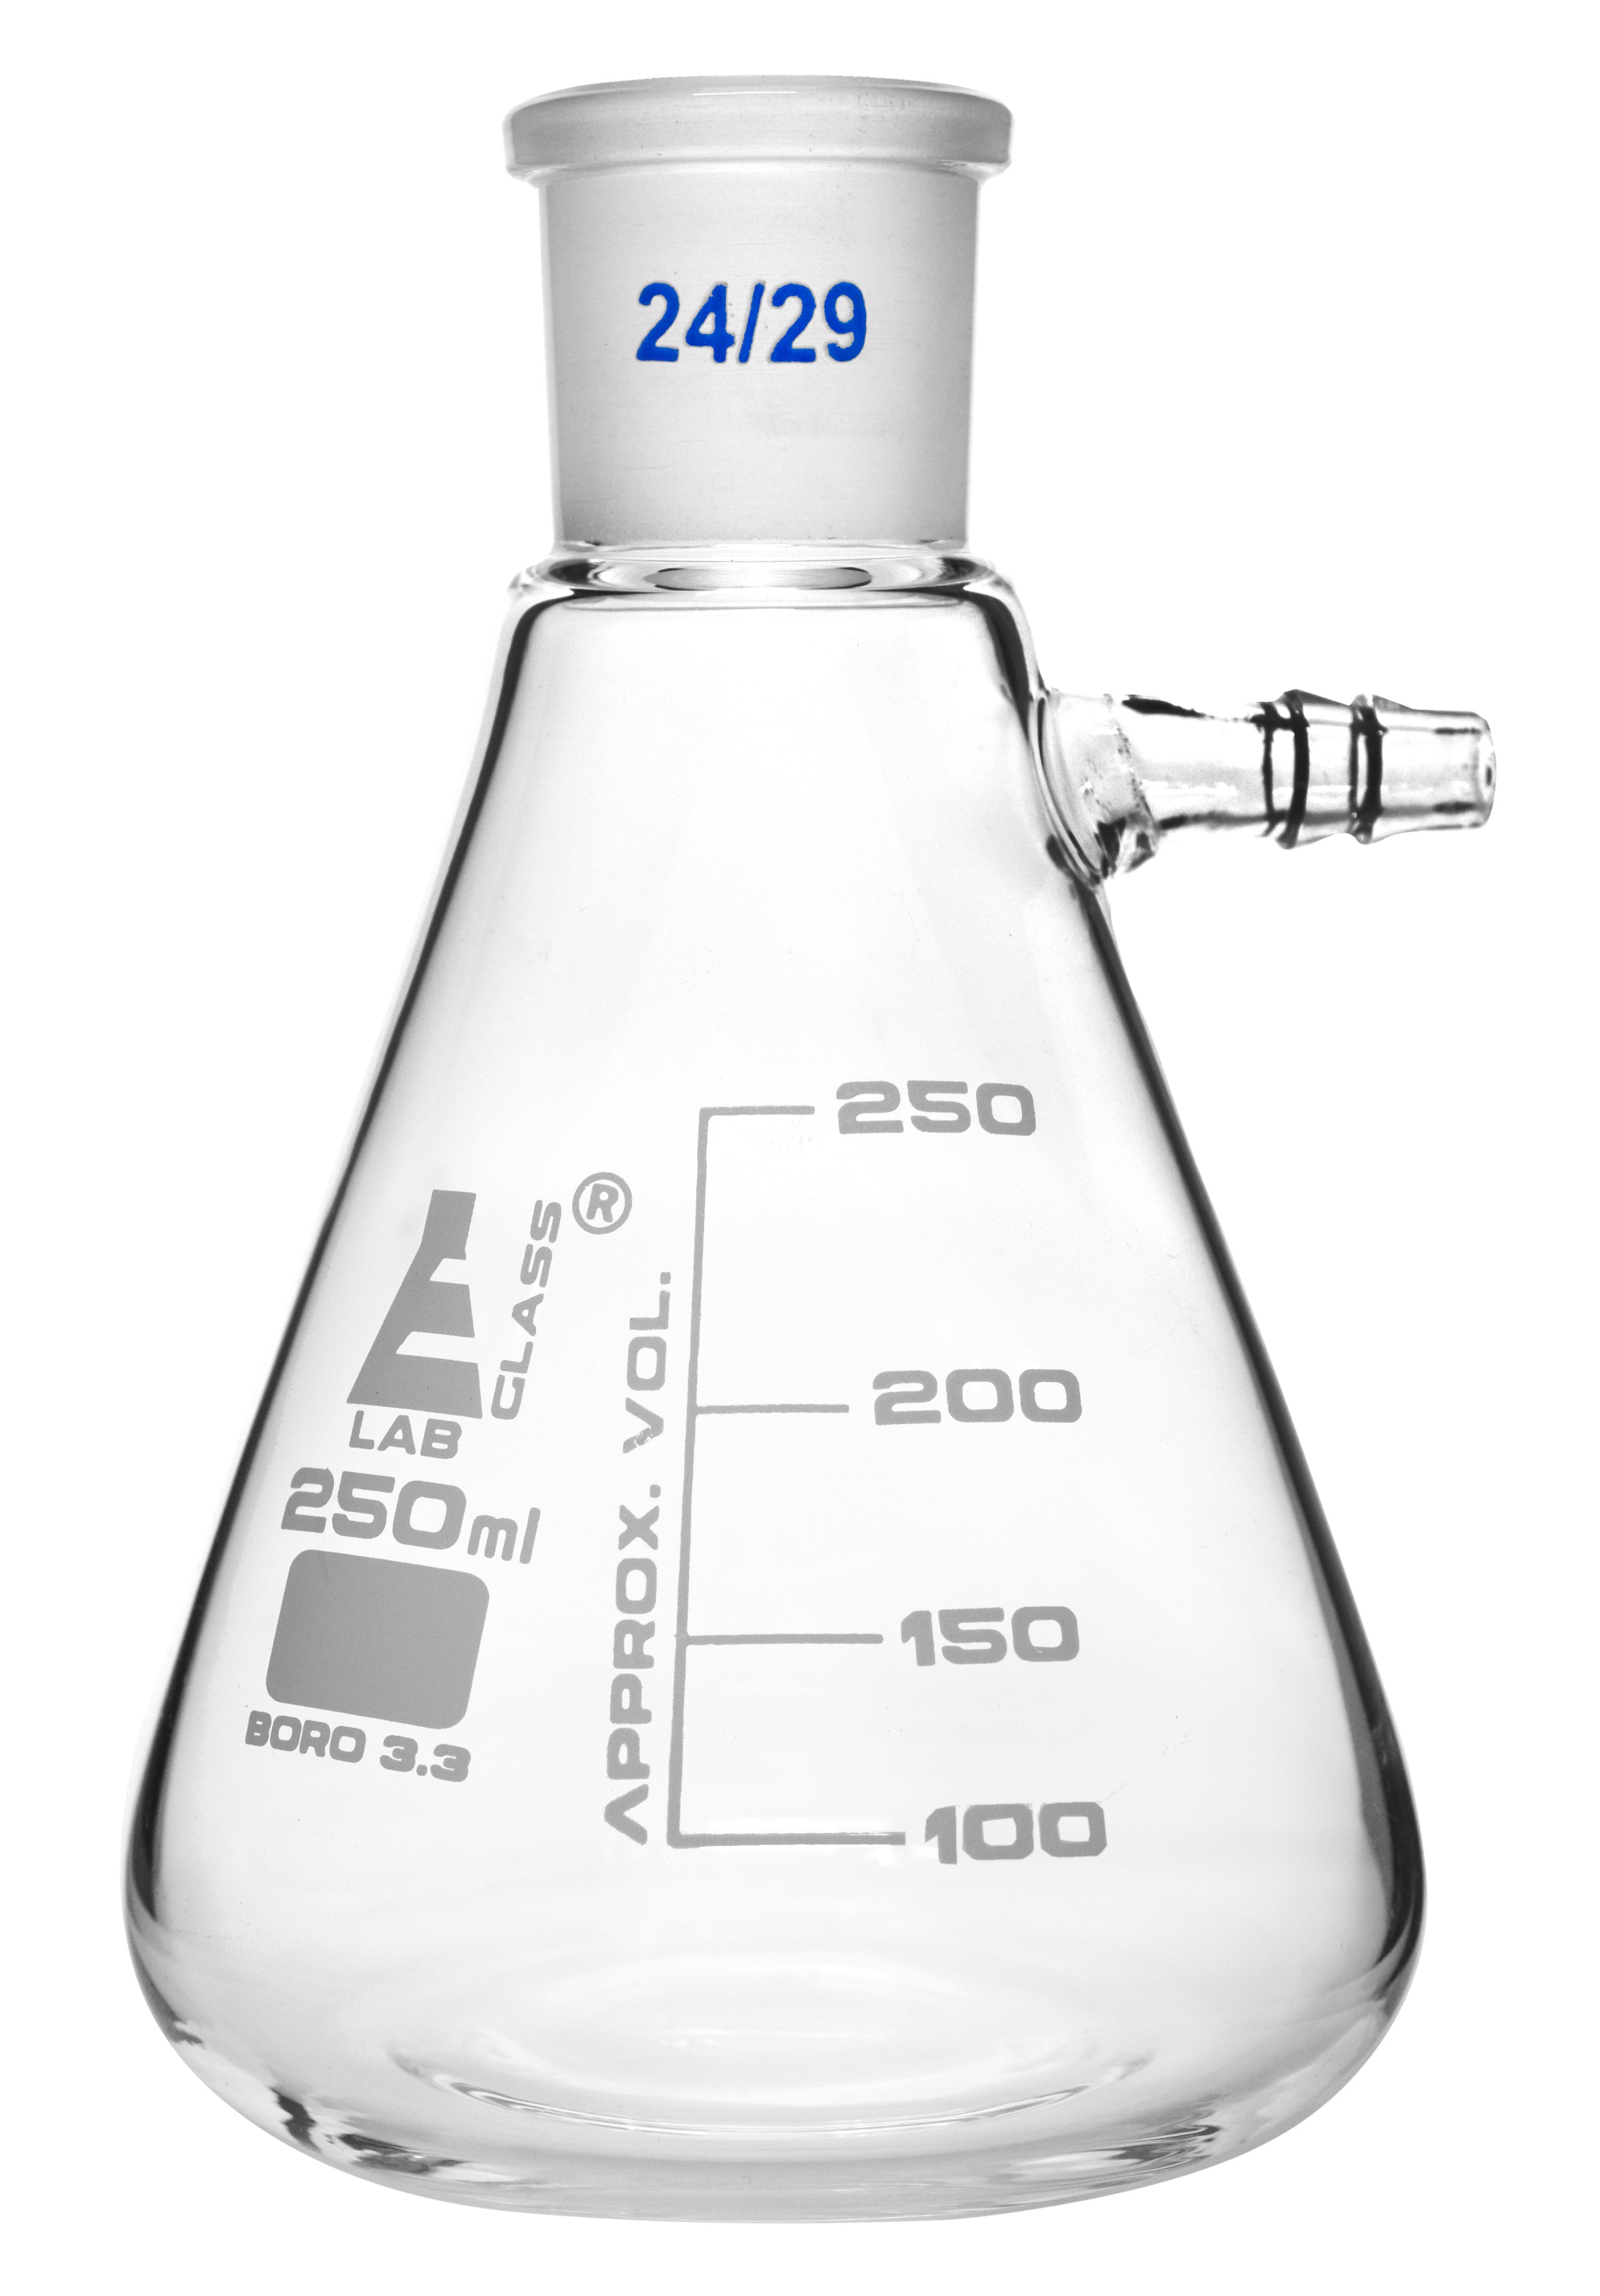 Borosilicate Glass Buchner Filtering Flask With Integral Side Arm, 250ml, Graduated, Autoclavable